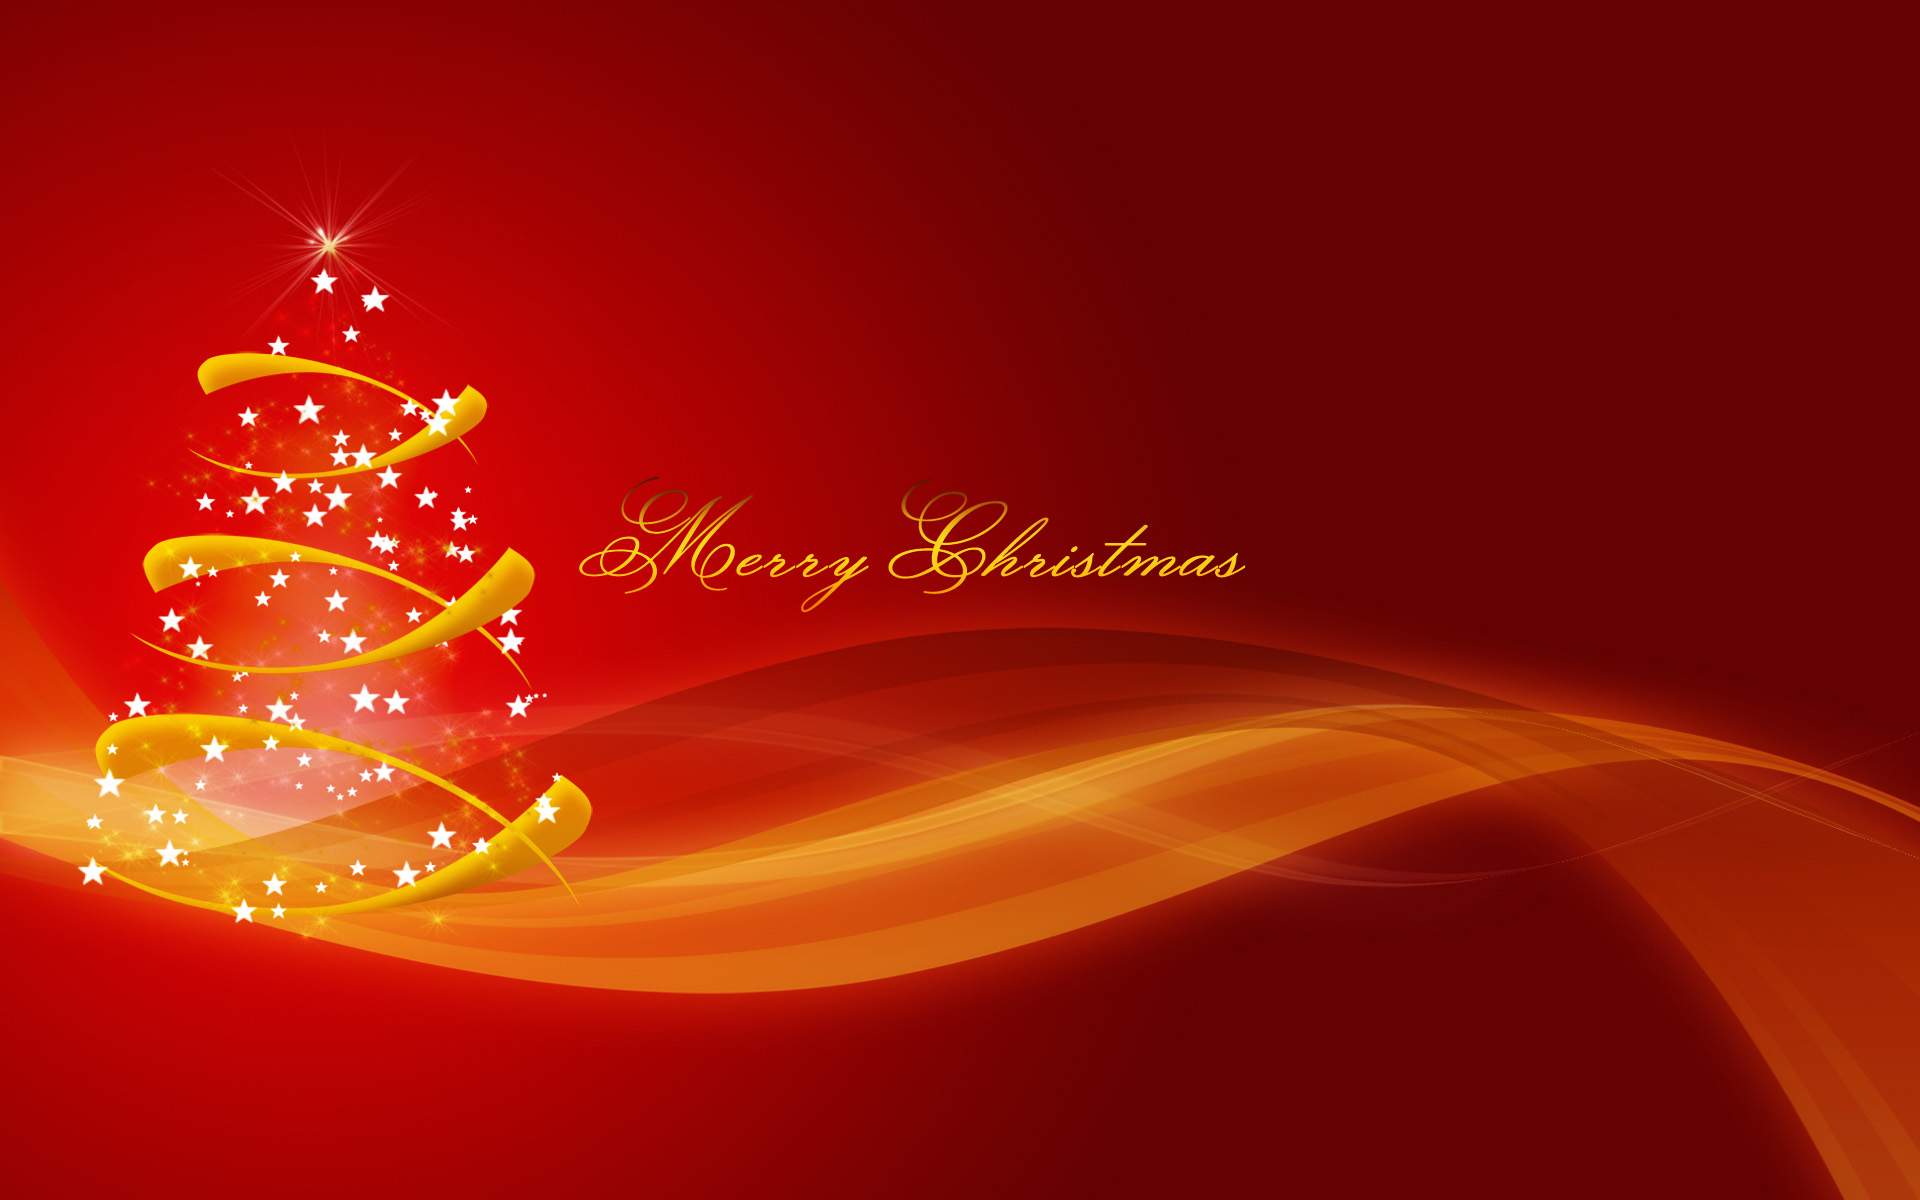 30 Amazing High Res Christmas Wallpapers in High Quality, Stoyan